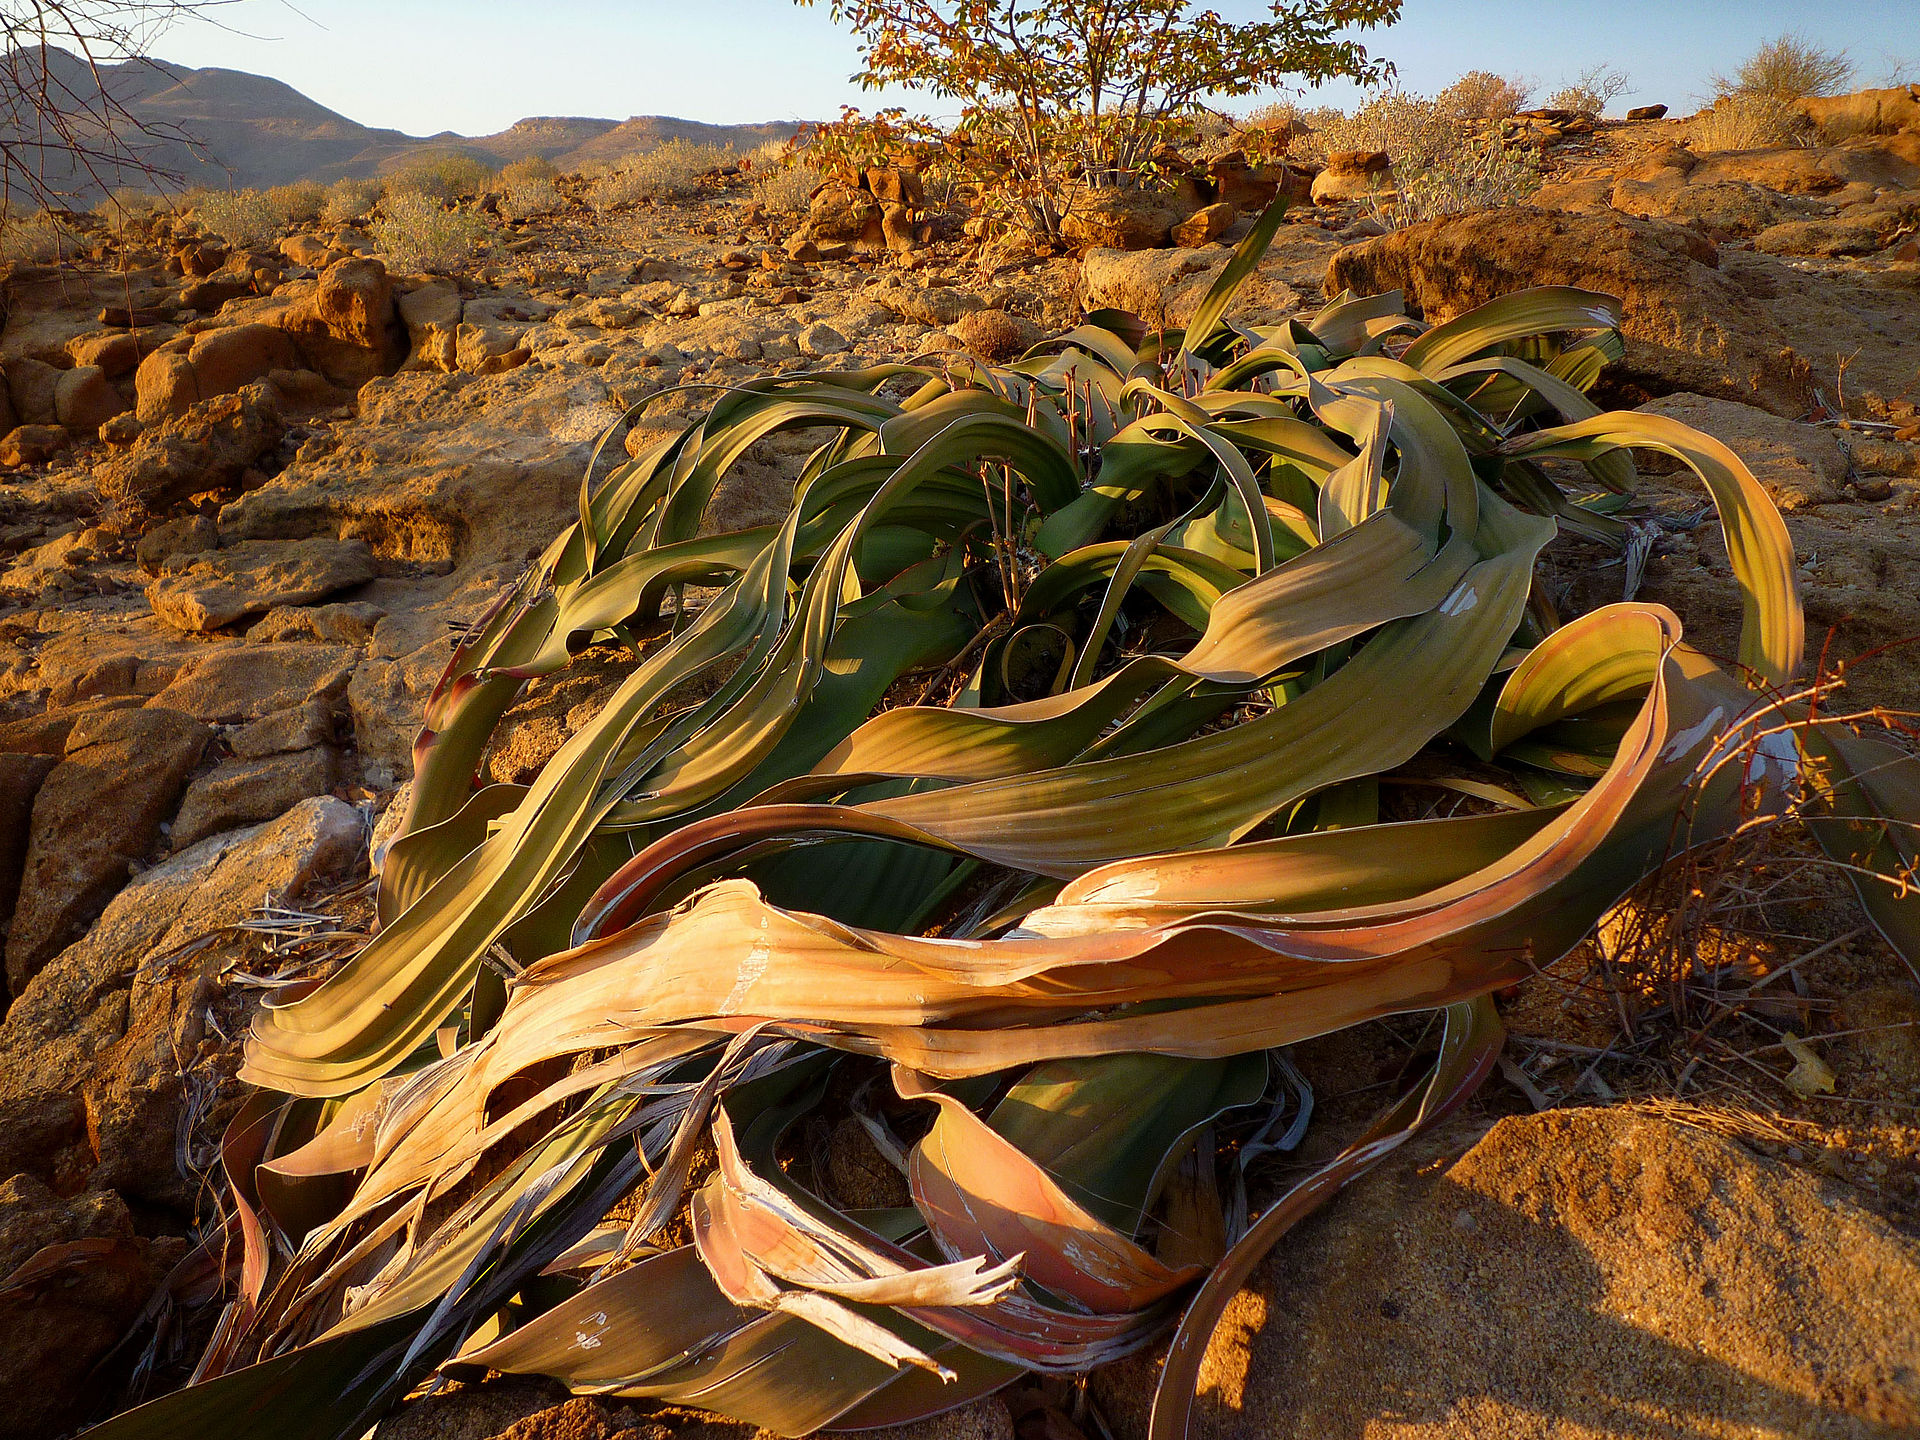 A large Welwitschia plant, the leaves are piling on top of themselves and there appear to be more than two, as the leaves have split many times